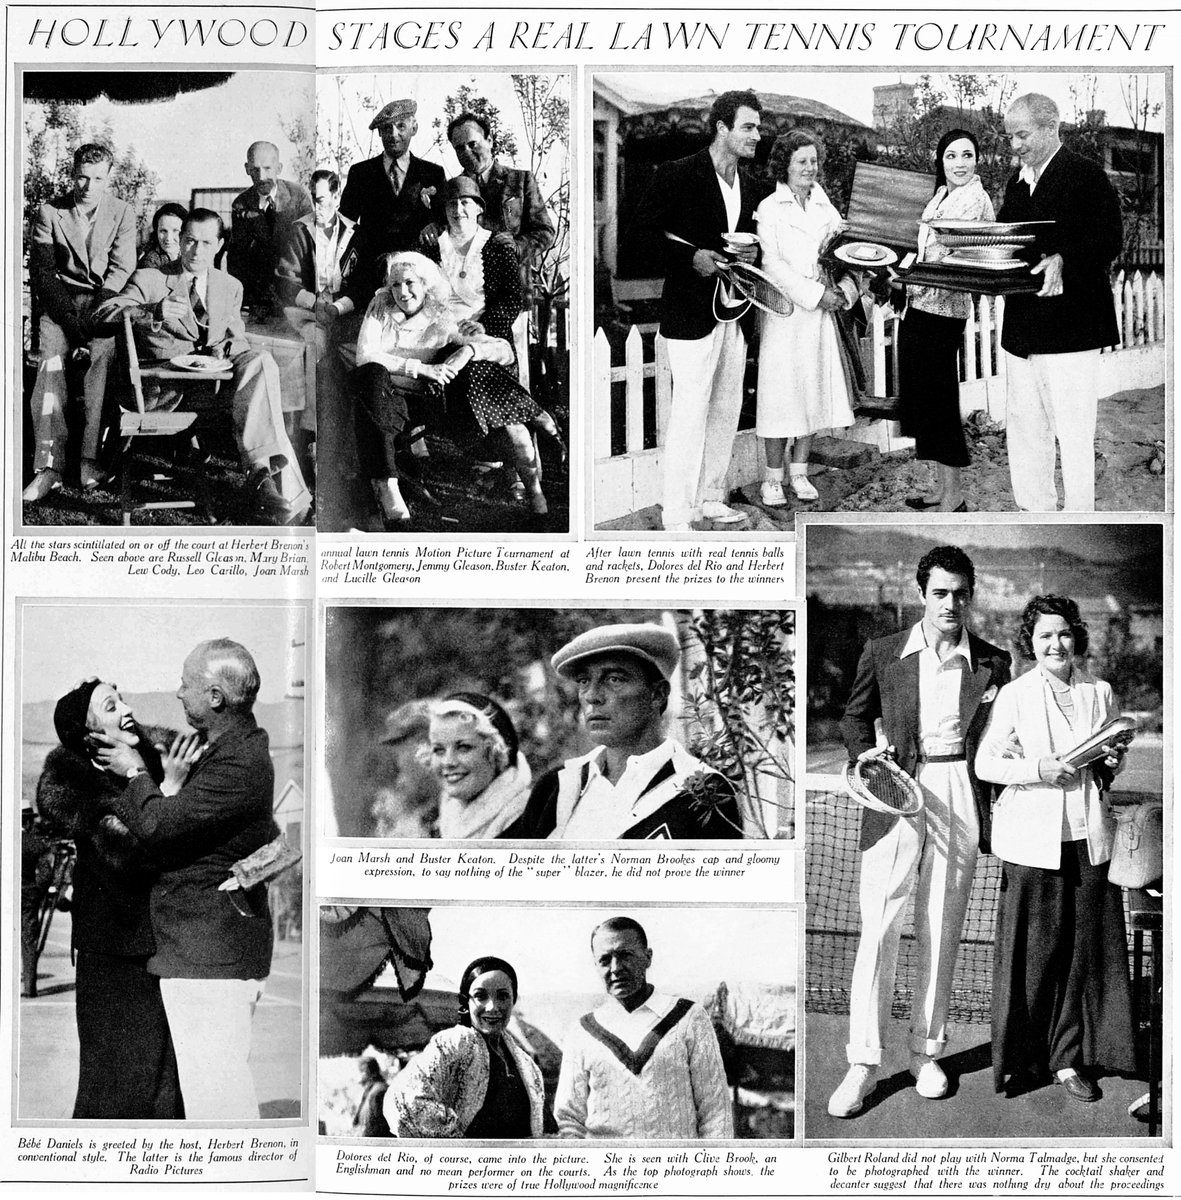 Hollywood Stages A Real Lawn Tennis Tournament
The Bystander, December 2, 1931

#busterkeaton #gilbertroland #normatalmadge #bebedaniels #robertmontgomery #doloresdelrio
#damfino #oldhollywood #tennis #herbertbrenon